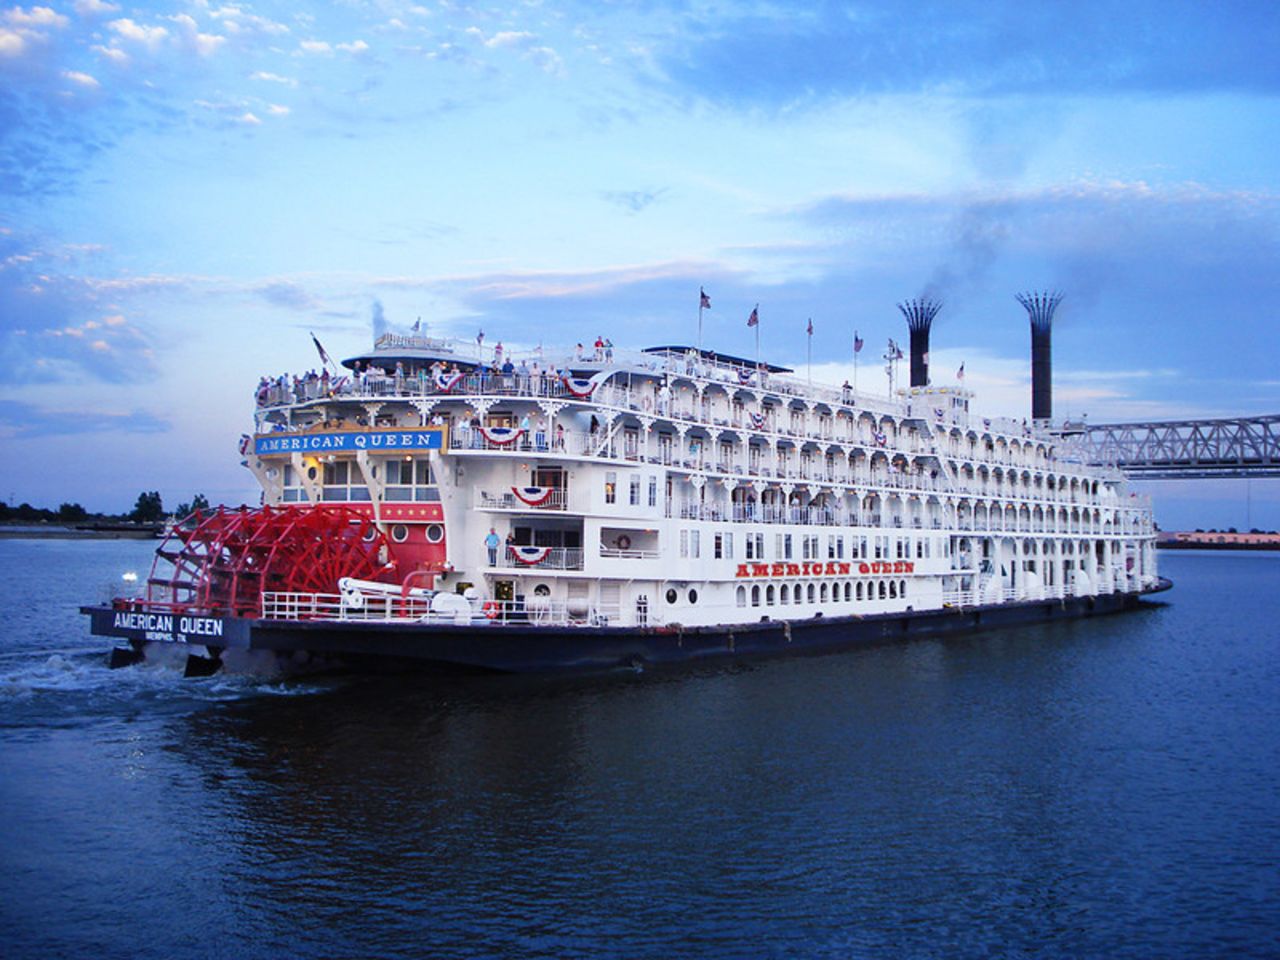 The American Queen Steamboat Company's Mississippi River cruise provides a history lesson in antebellum culture and southern cooking. 